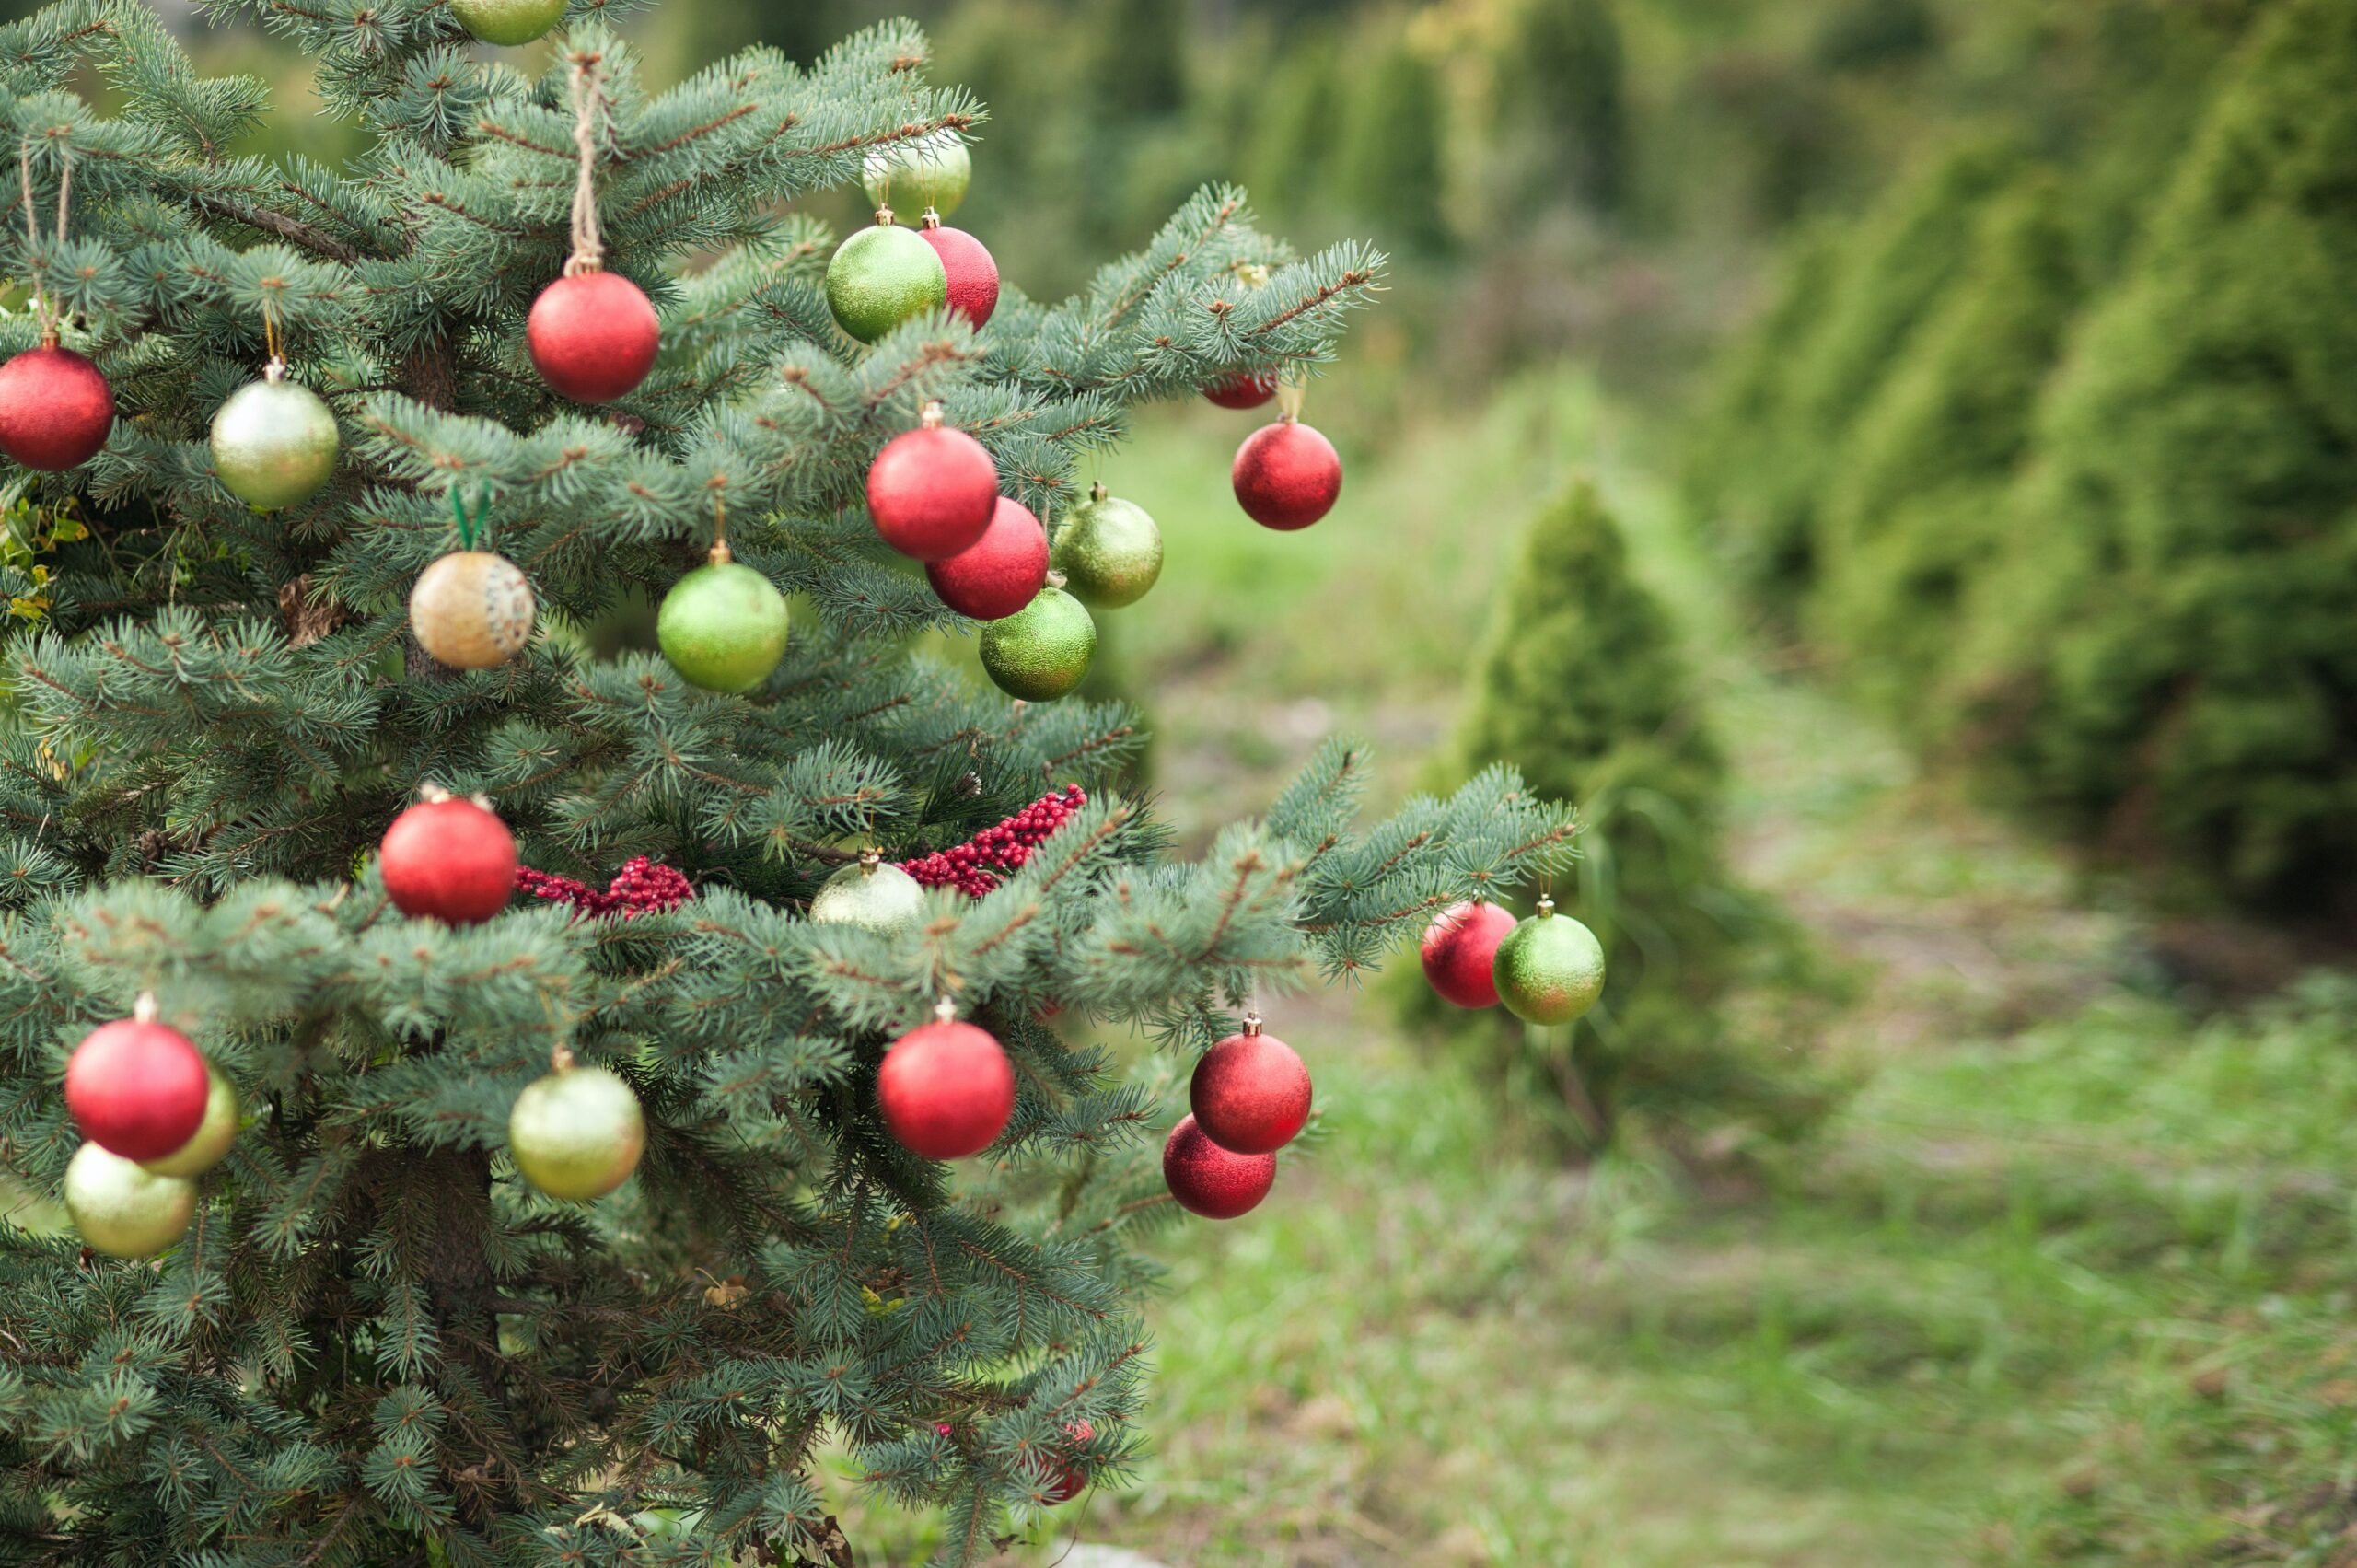 A Christmas tree in a Christmas tree farm decorated with ornaments, lights and berries